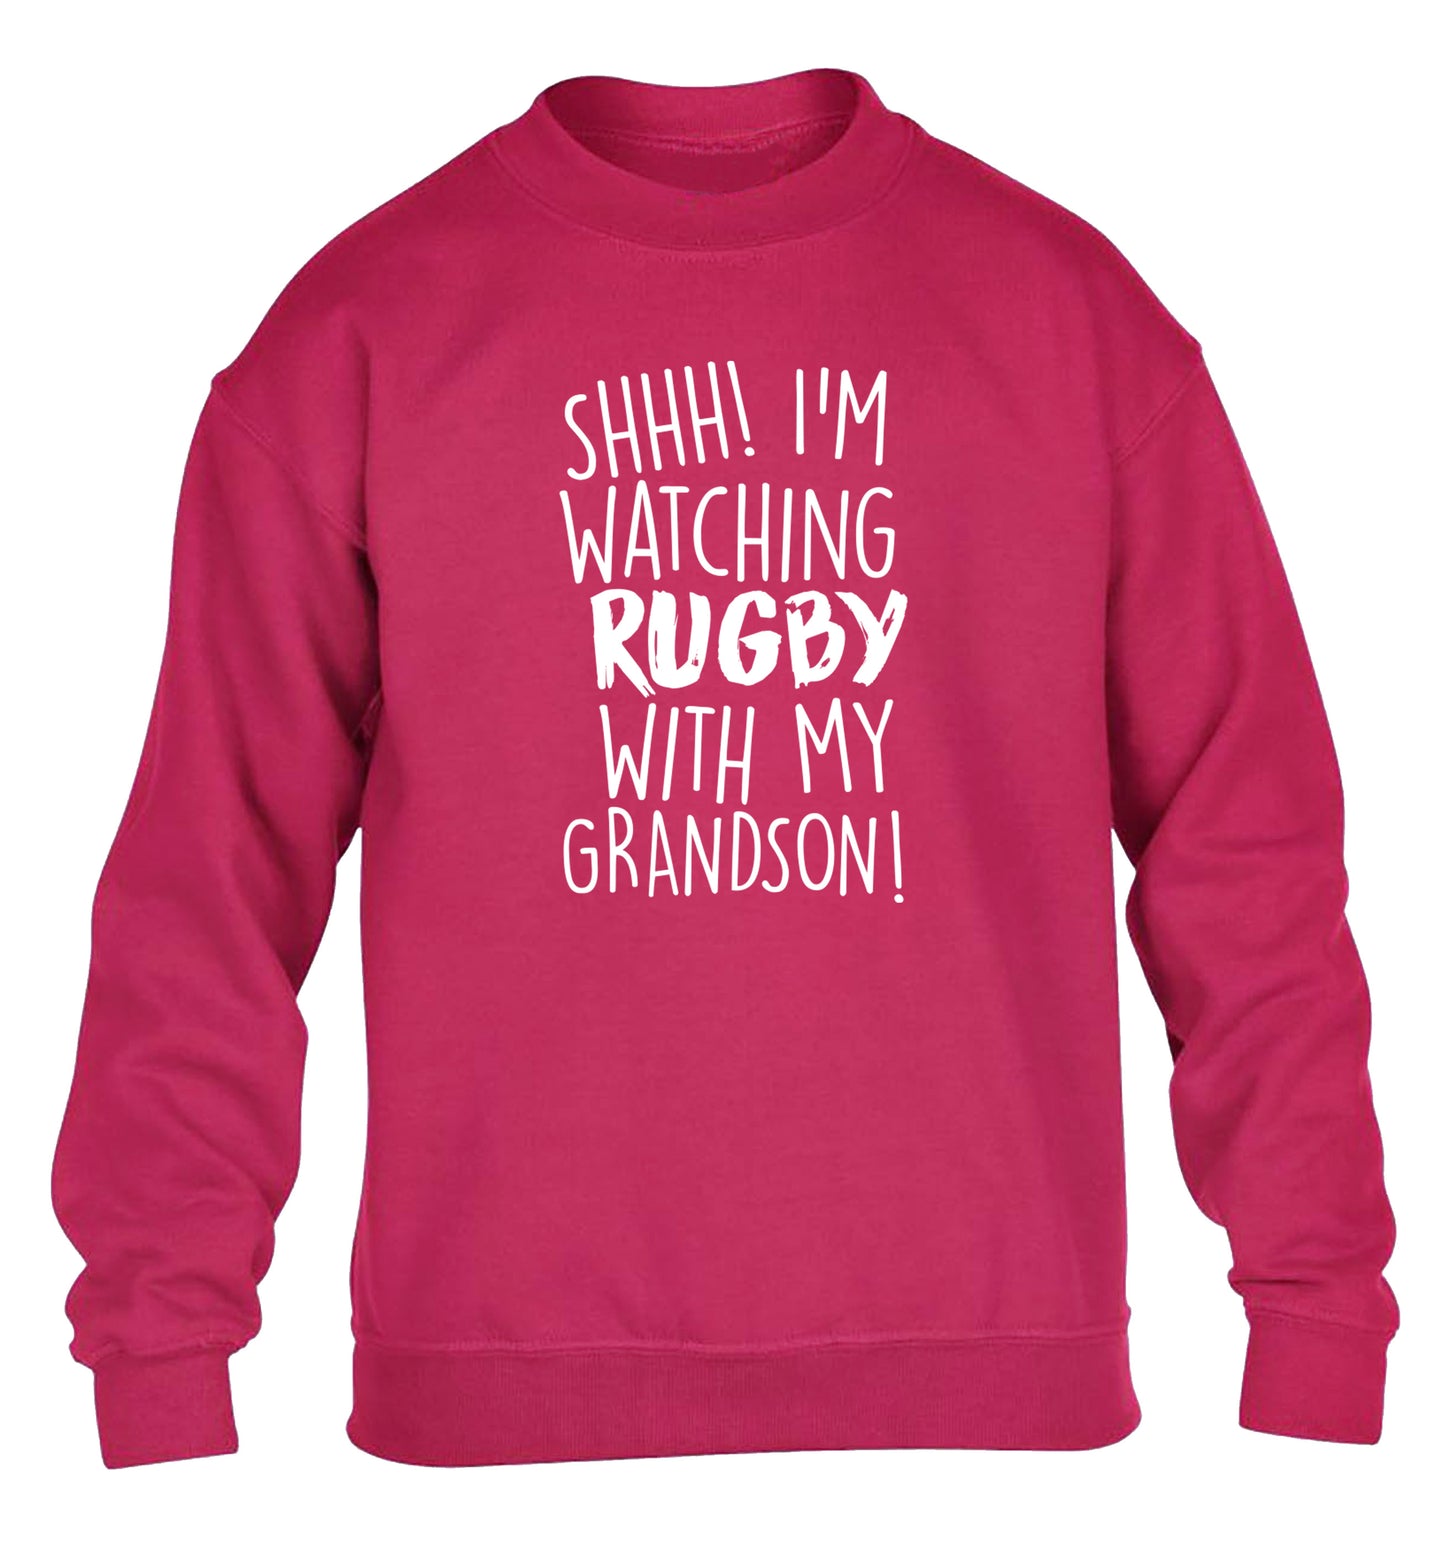 Shh I'm watching rugby with my grandson children's pink sweater 12-13 Years